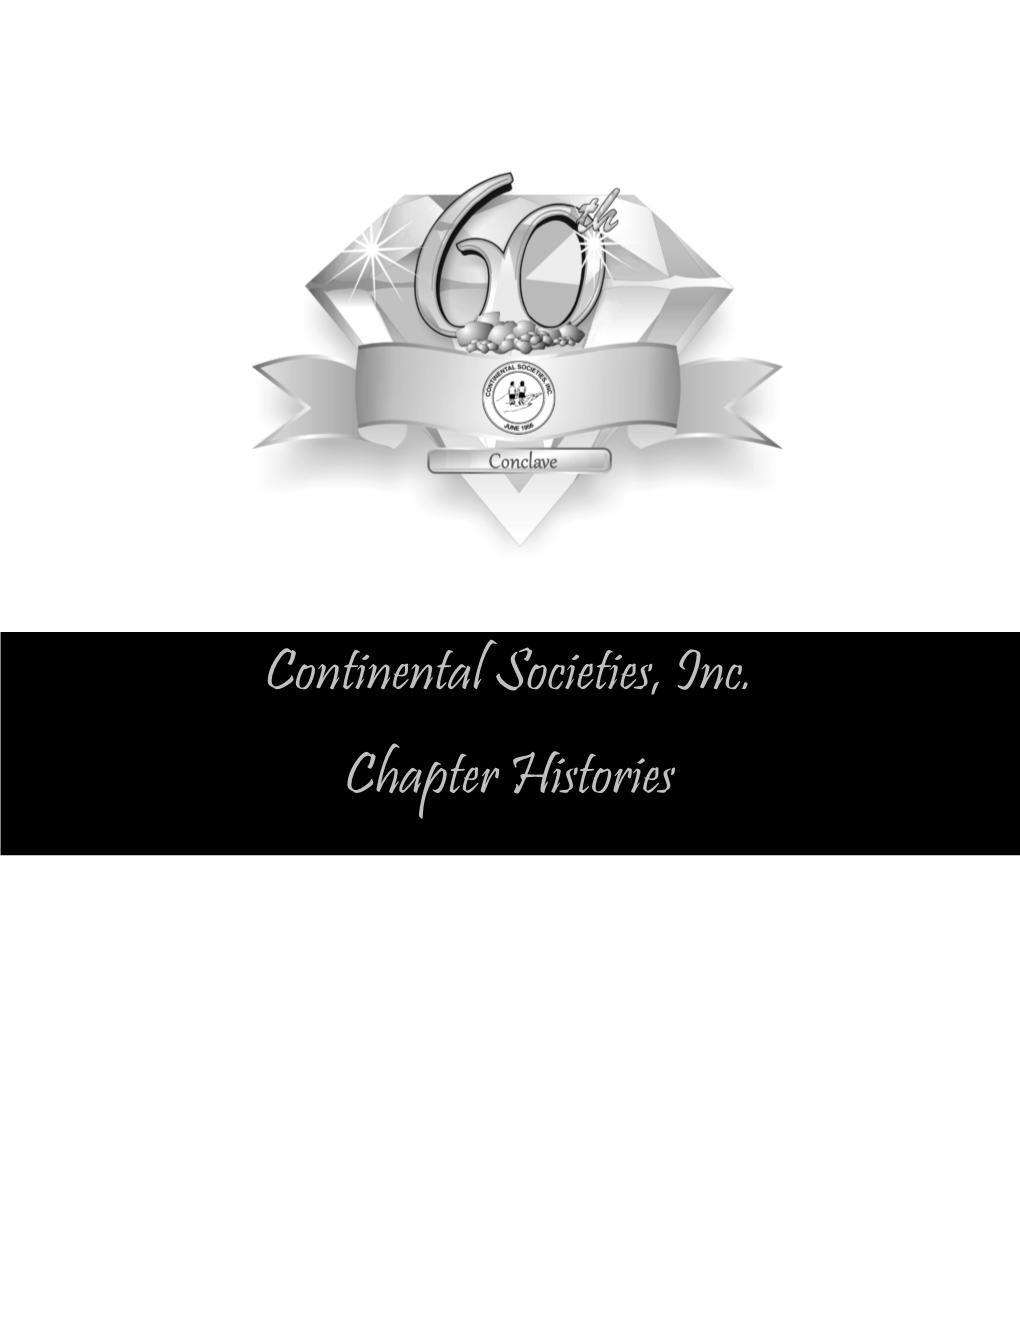 Continental Societies, Inc. Chapter Histories INTRODUCTORY MESSAGE: Edna Lee Moffitt, National President, Continental Societies, Incorporated